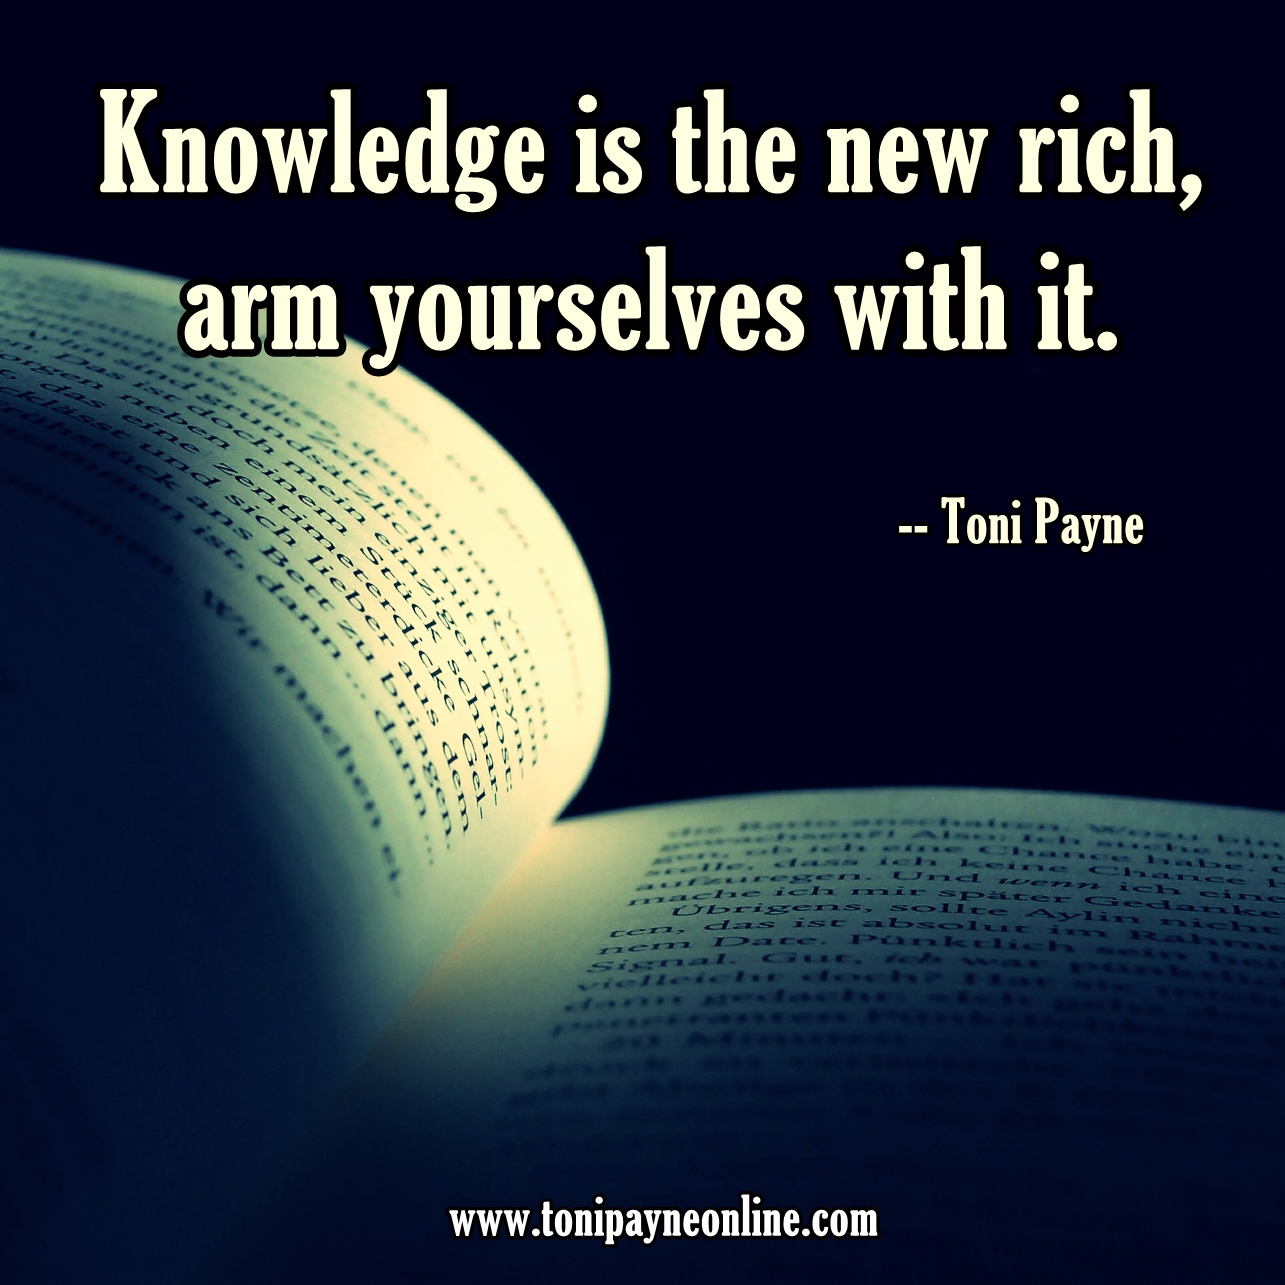 Quote About Knowledge - Knowledge is the new rich